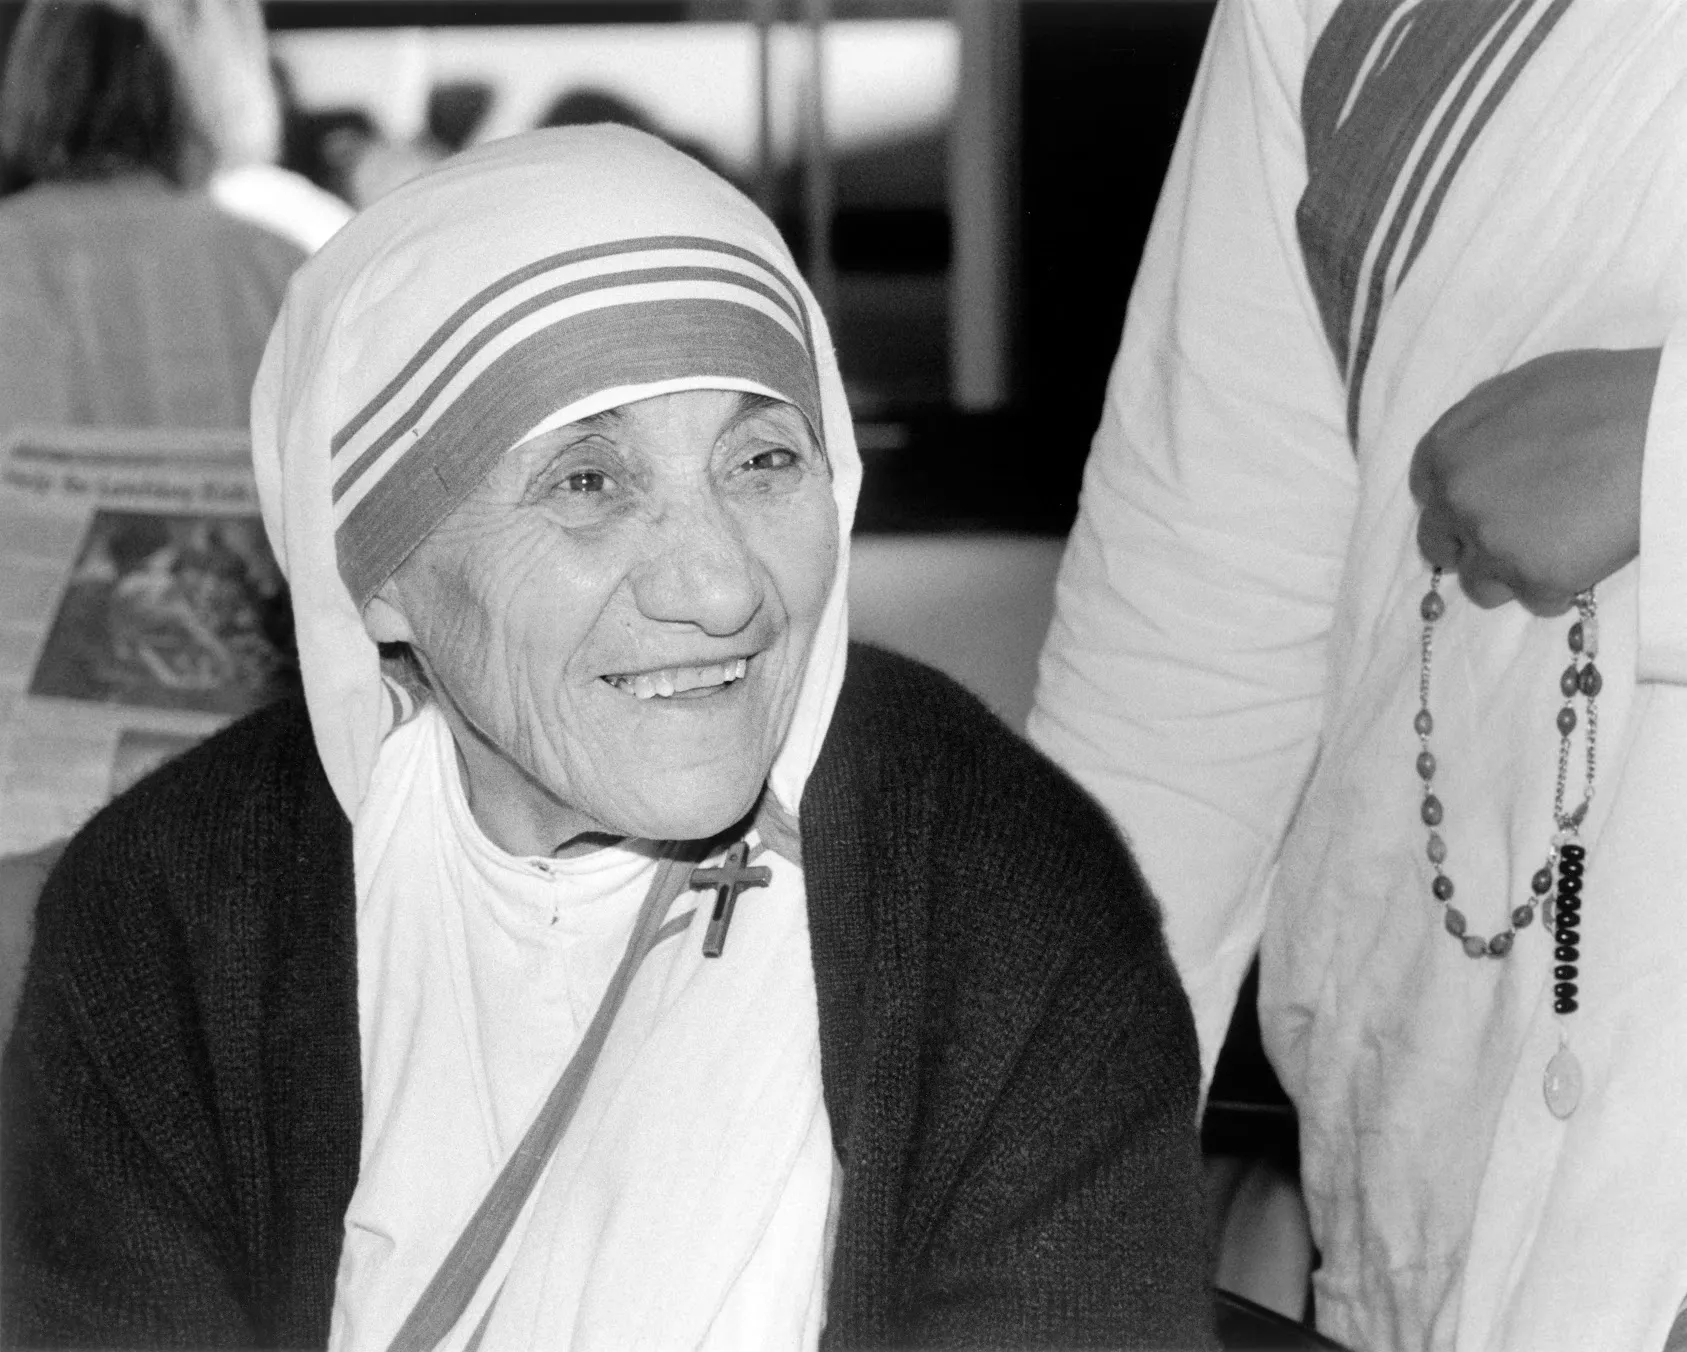 Film about Mother Teresa to hit theaters in October | Catholic News Agency